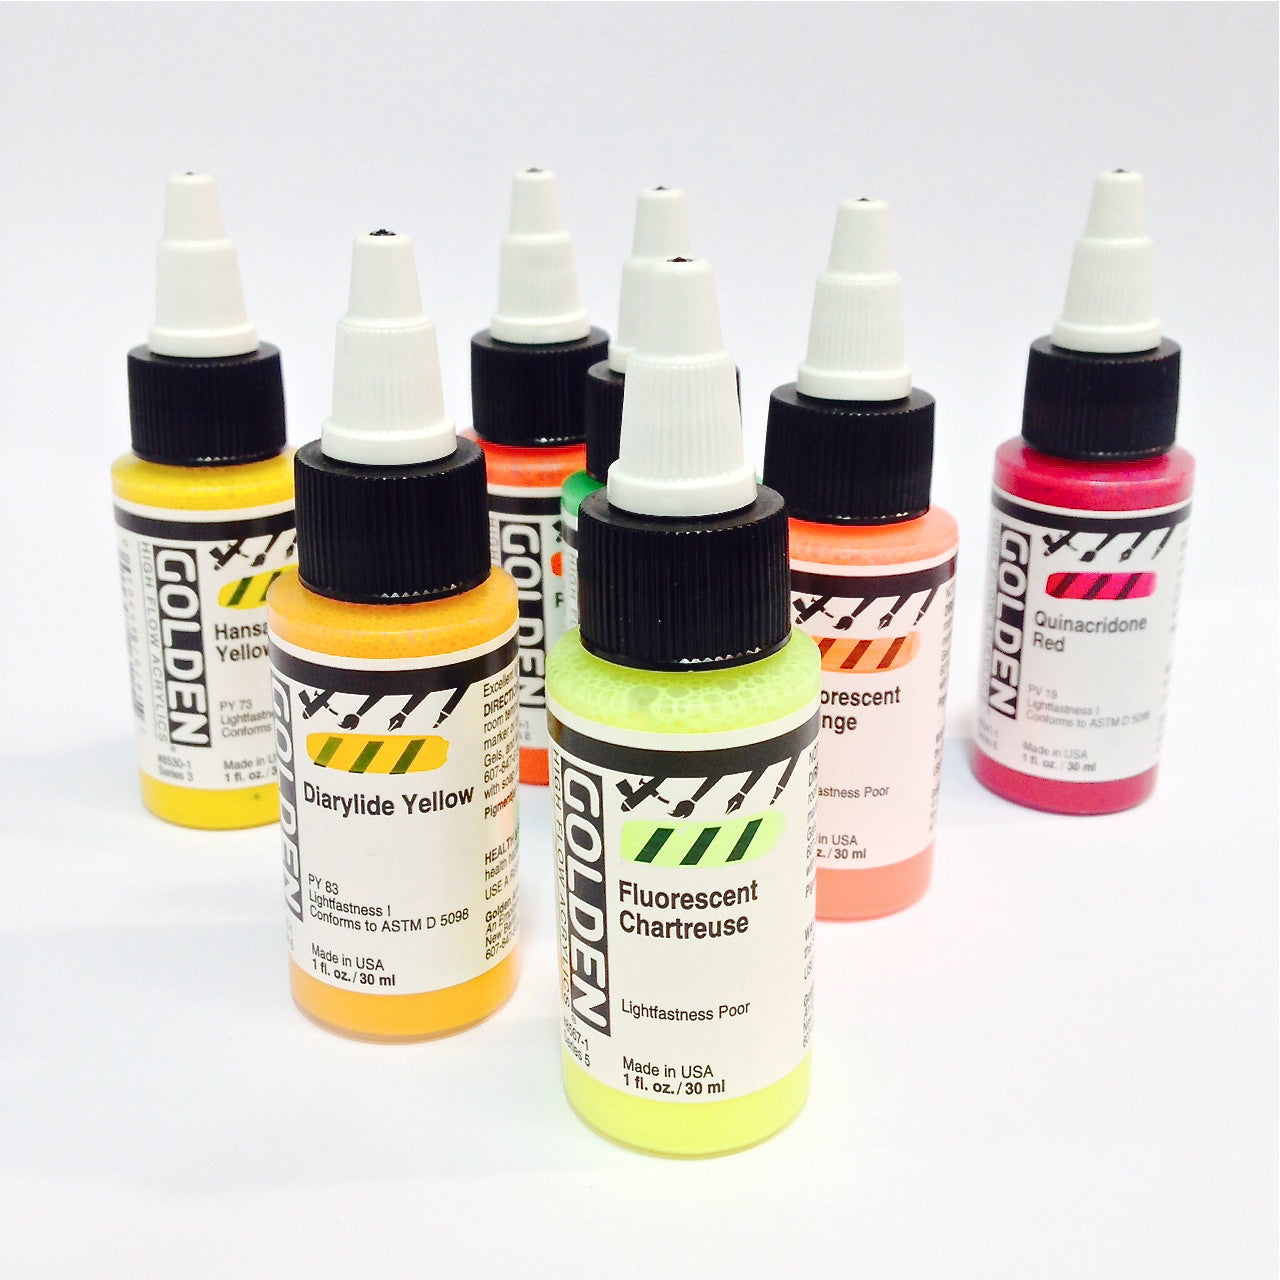 Golden High Flow Artist Acrylic Paints and Sets